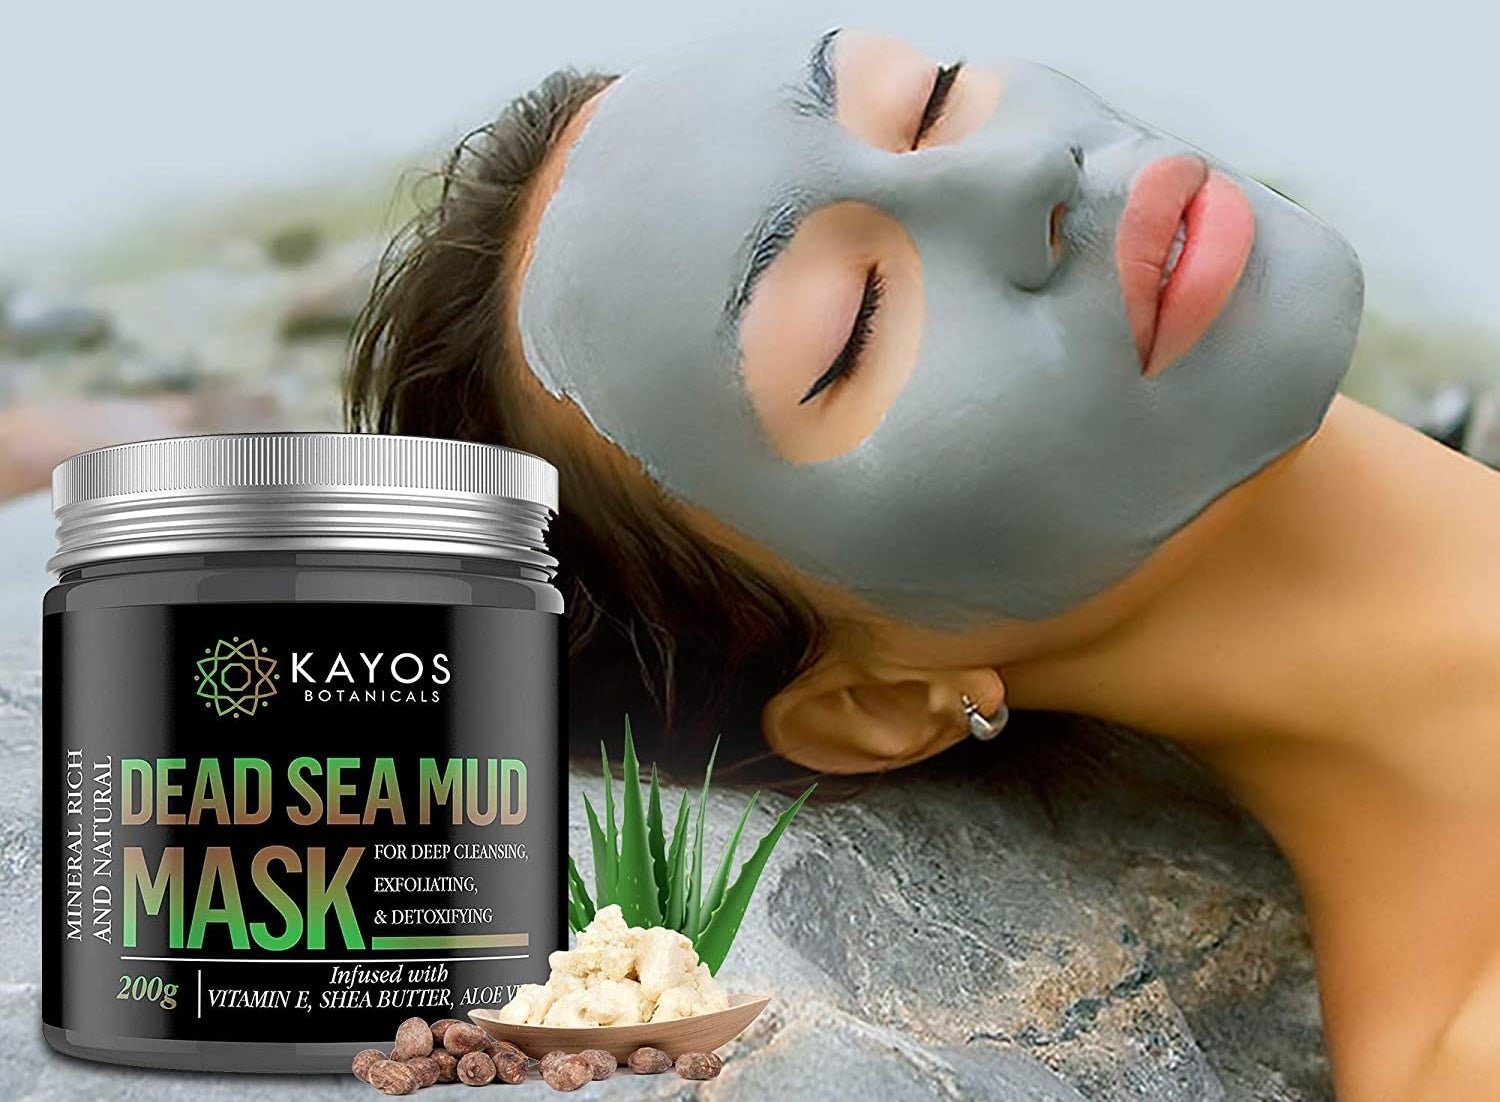 A woman with a mud mask on lying next to a container of Kayos Dead Sea Mud Mask